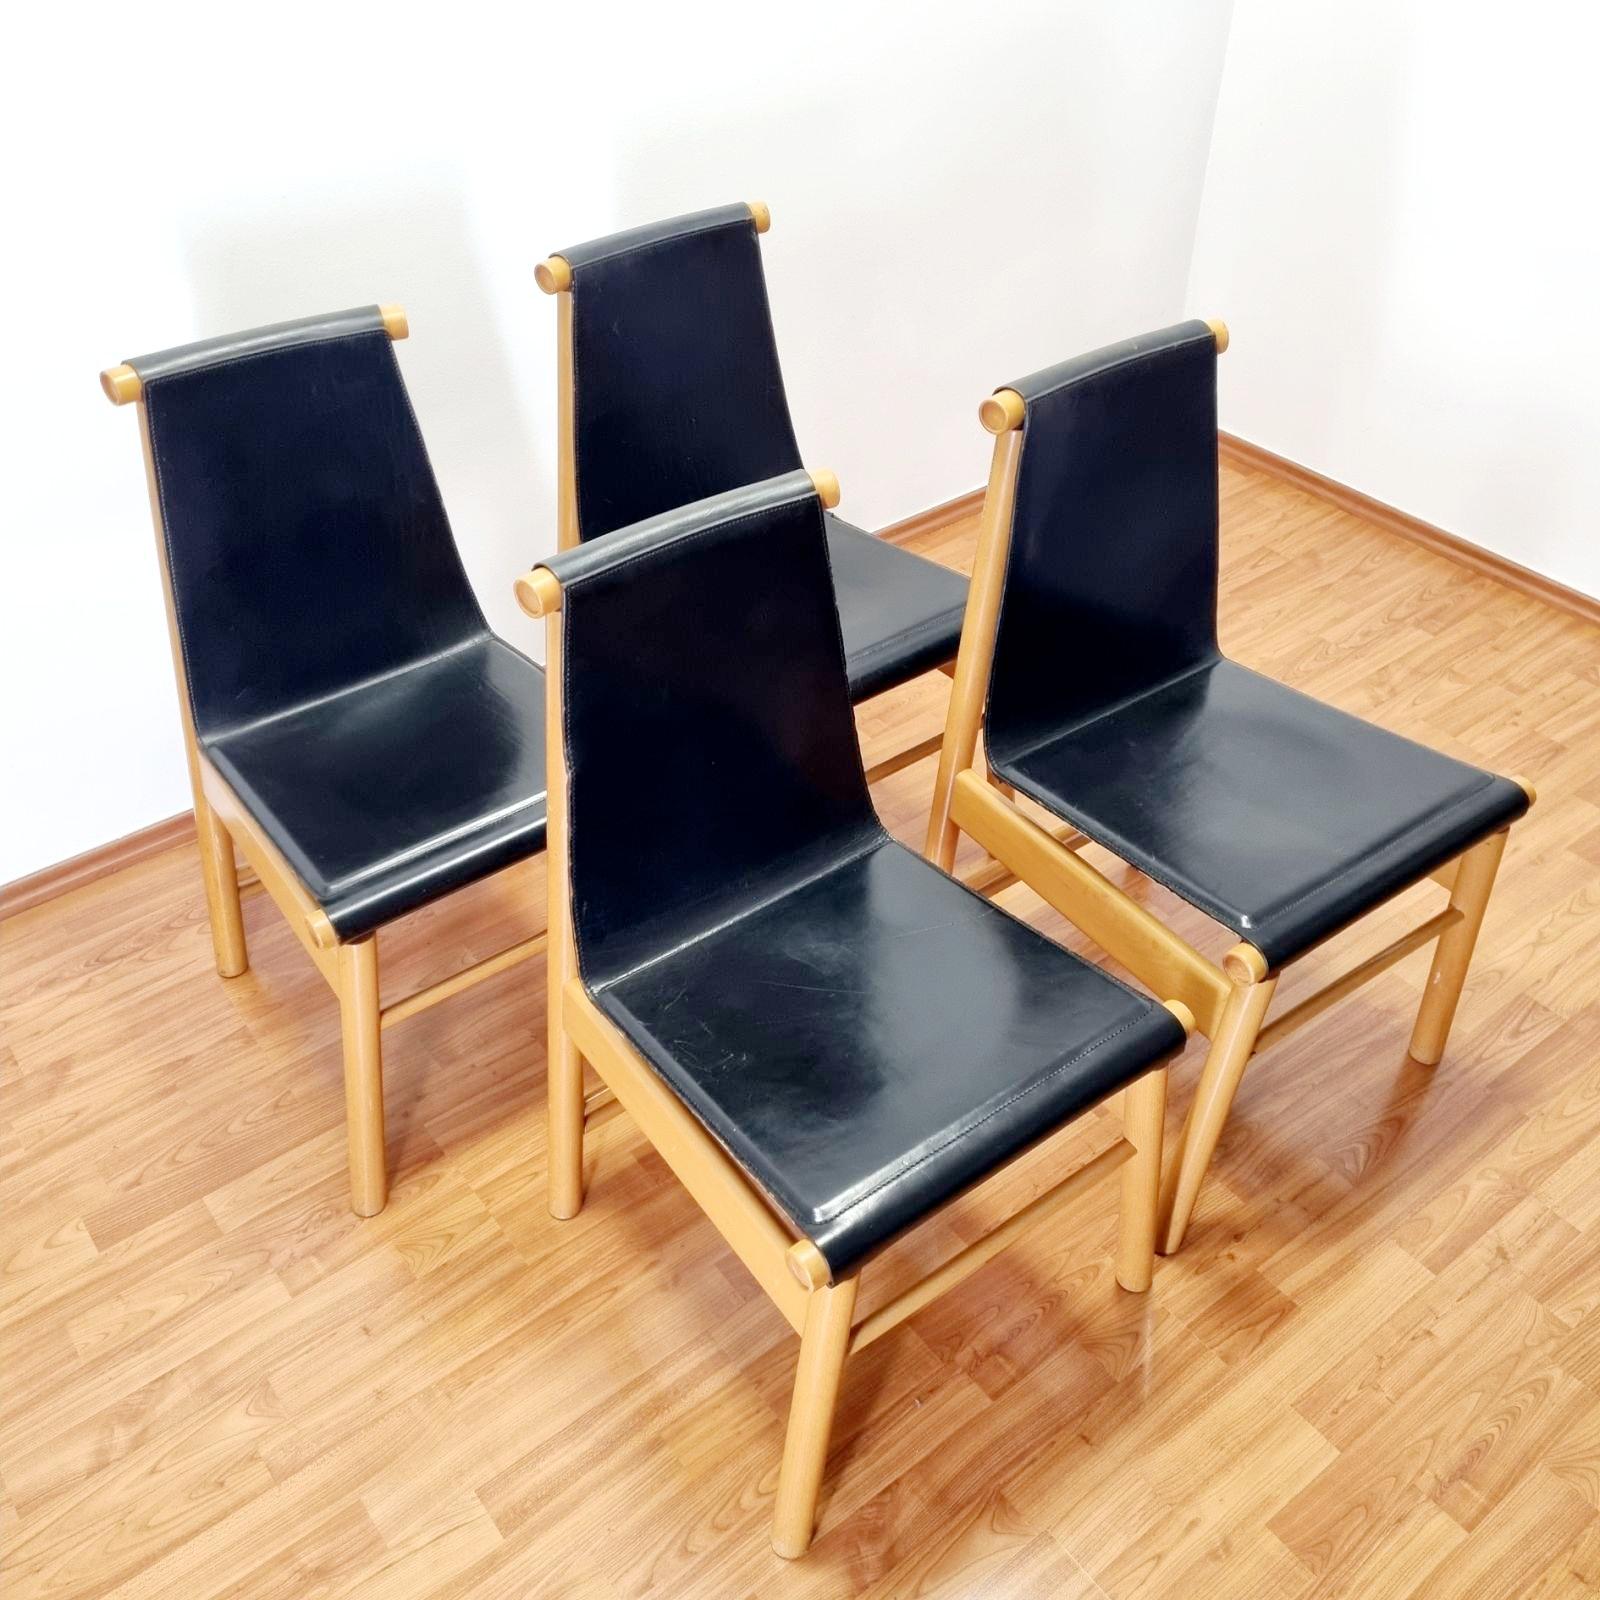 Set of 4 very rare dining chairs, produced in italy in the 70s. Made of wood and leather.
In very good condition with some traces of use.